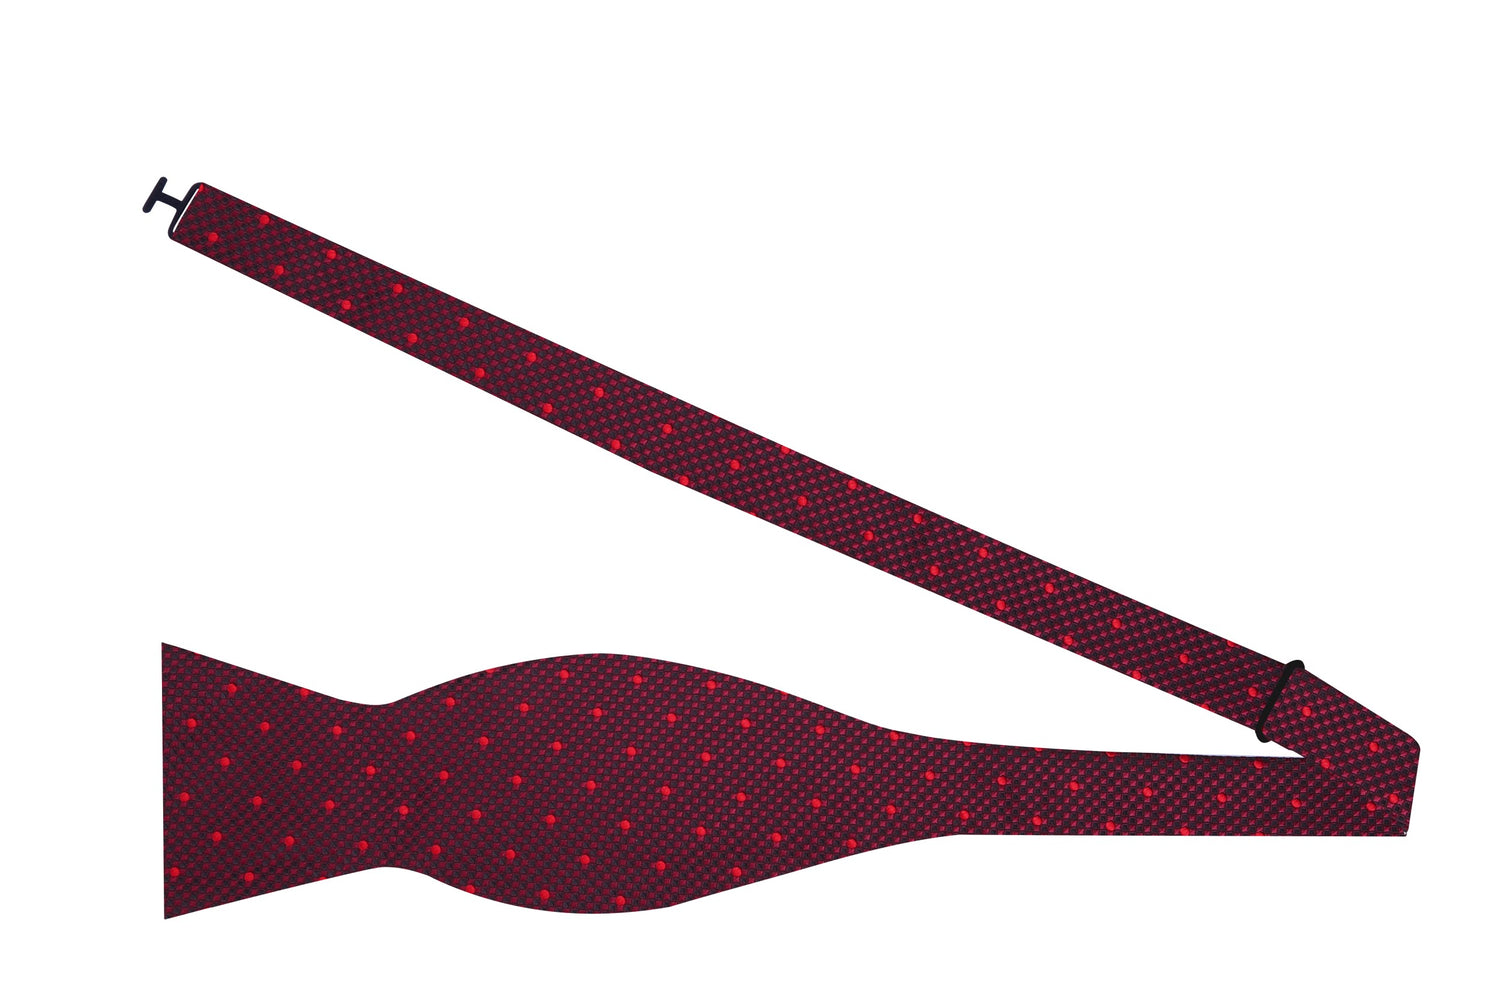 Self Tie: Shades of red geometric bow tie with polka accents,